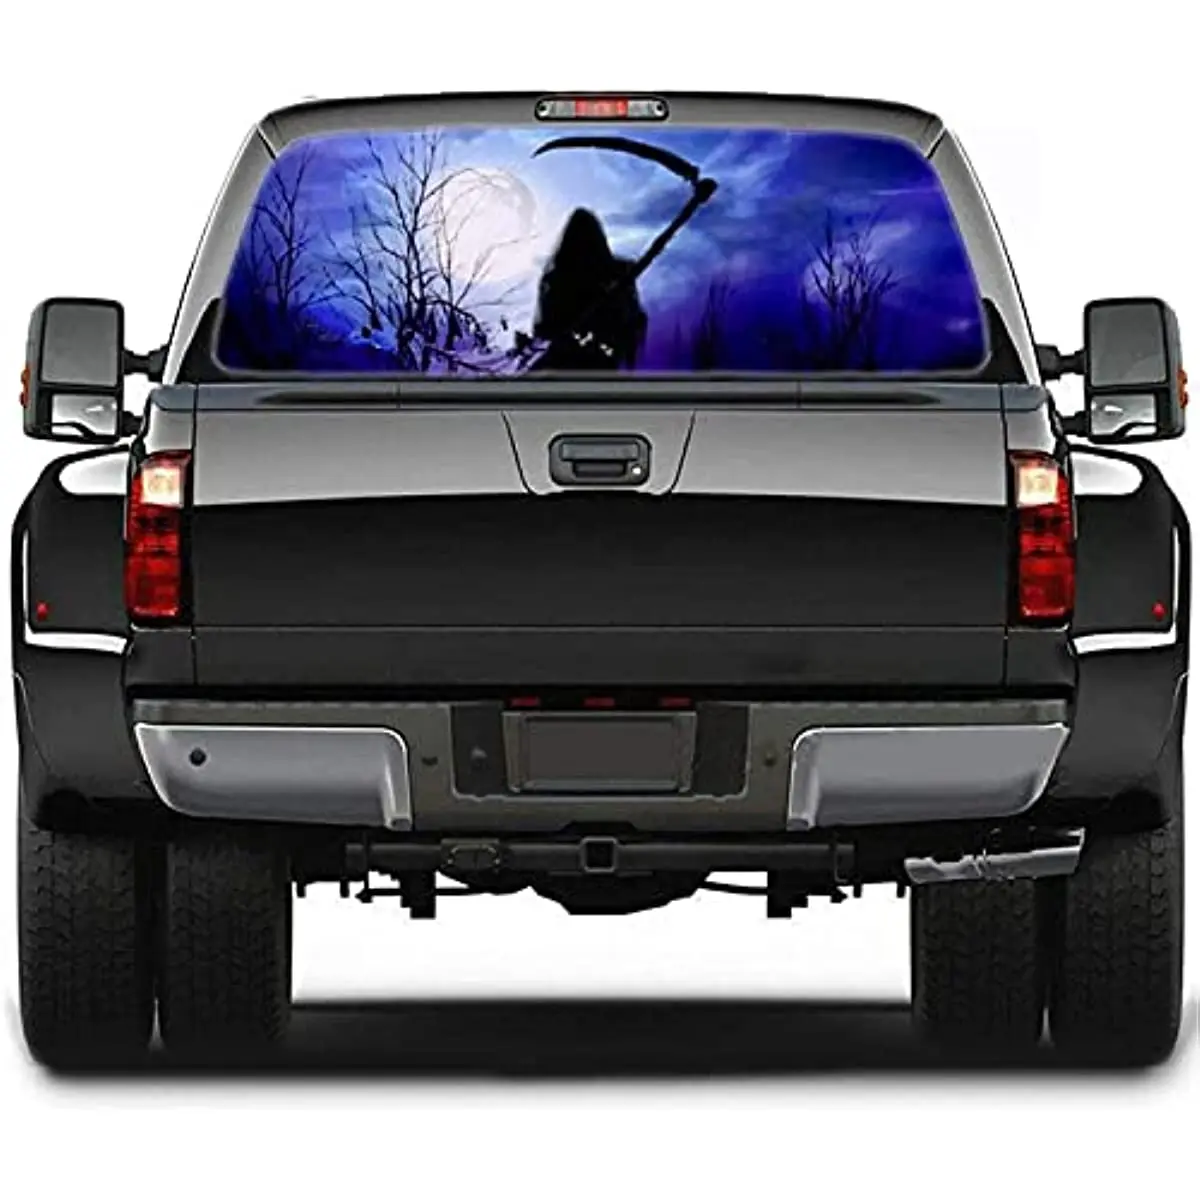 

Rear Window Truck Decal Sticker Grim Reaper Car Window Graphic Decal Perforated Vinyl Window Back Decal for Truck SUV Van Pickup